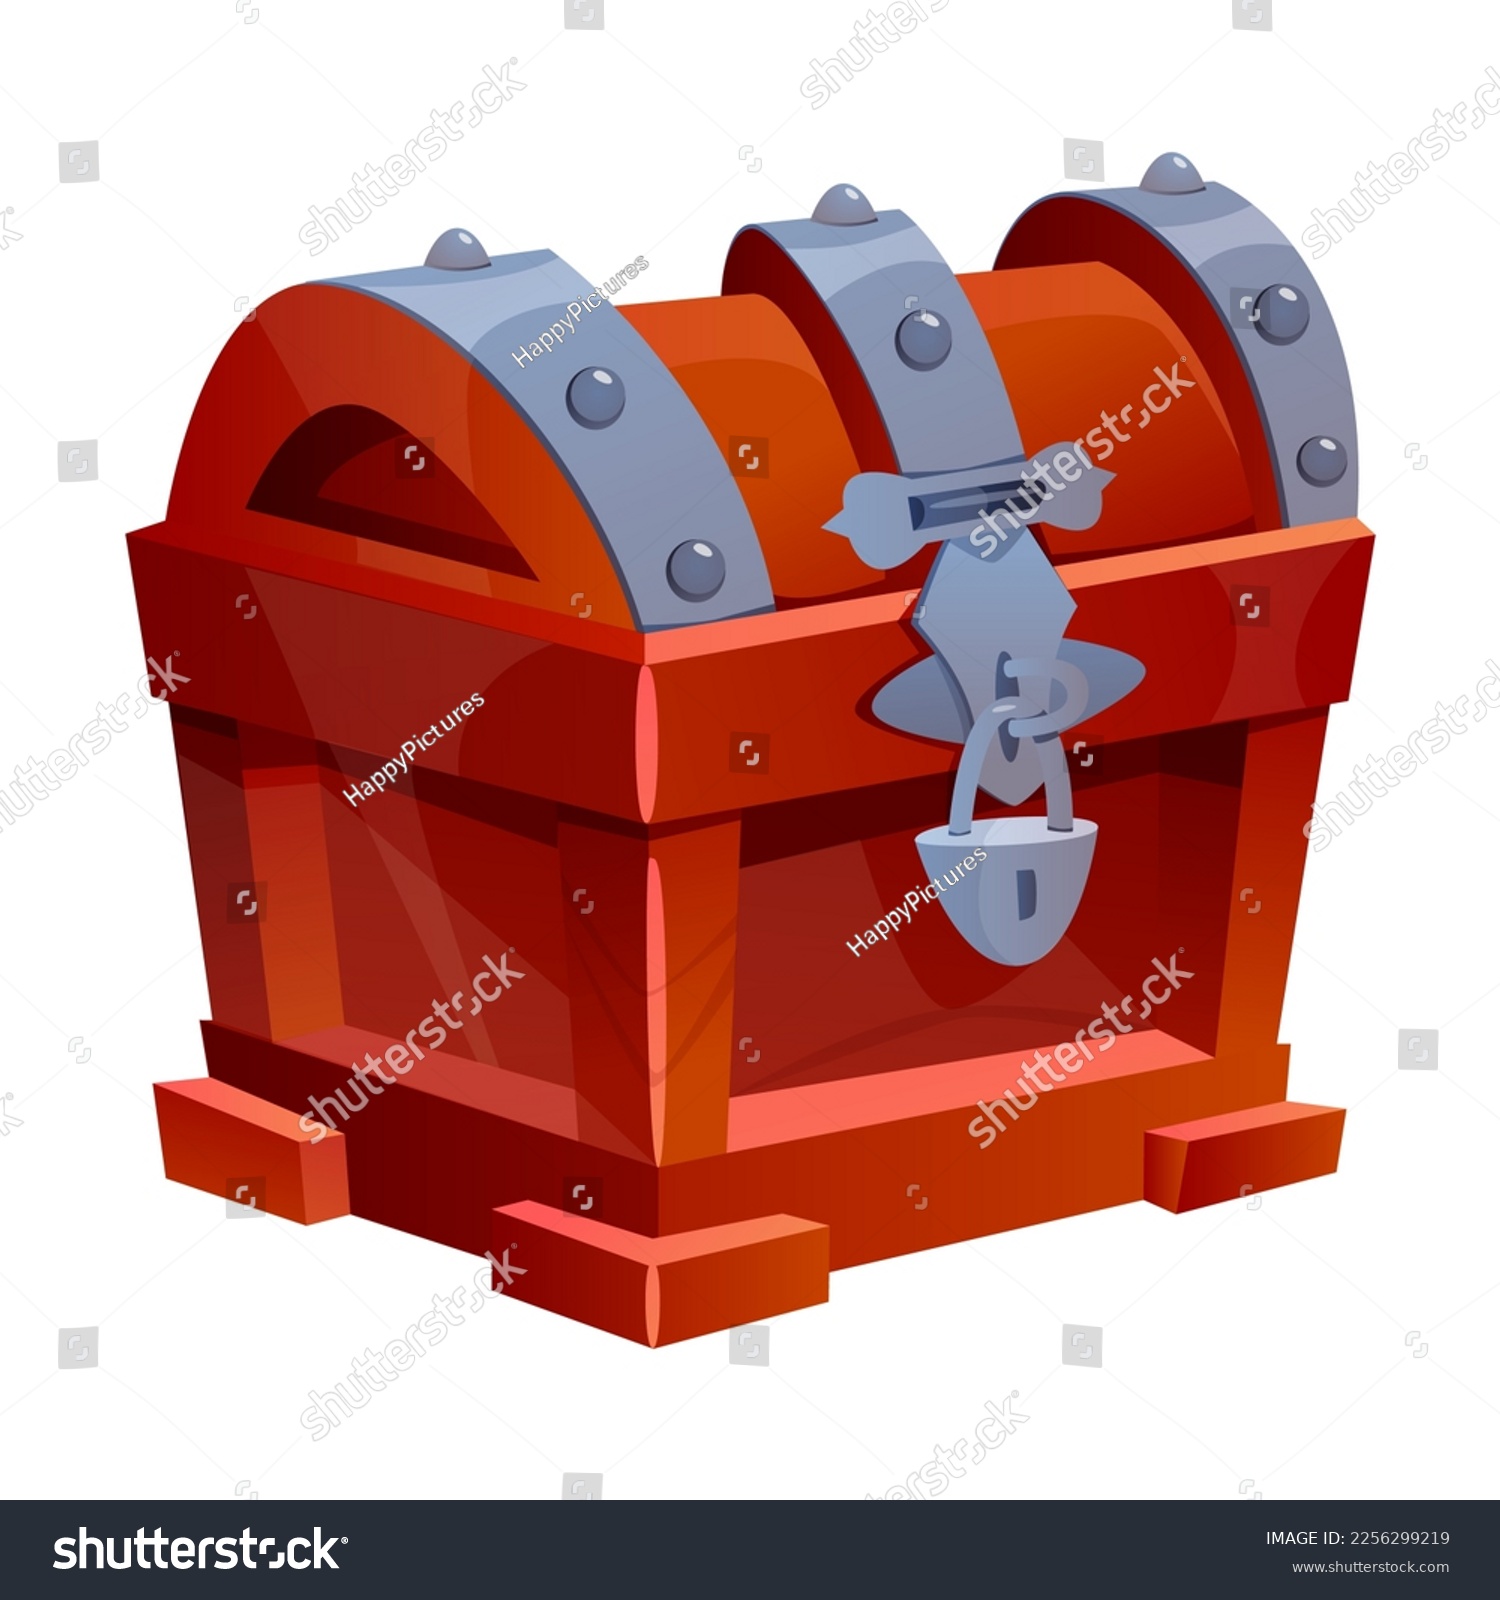 SVG of Brown Treasure Chest with Lock as Game Object Vector Illustration svg